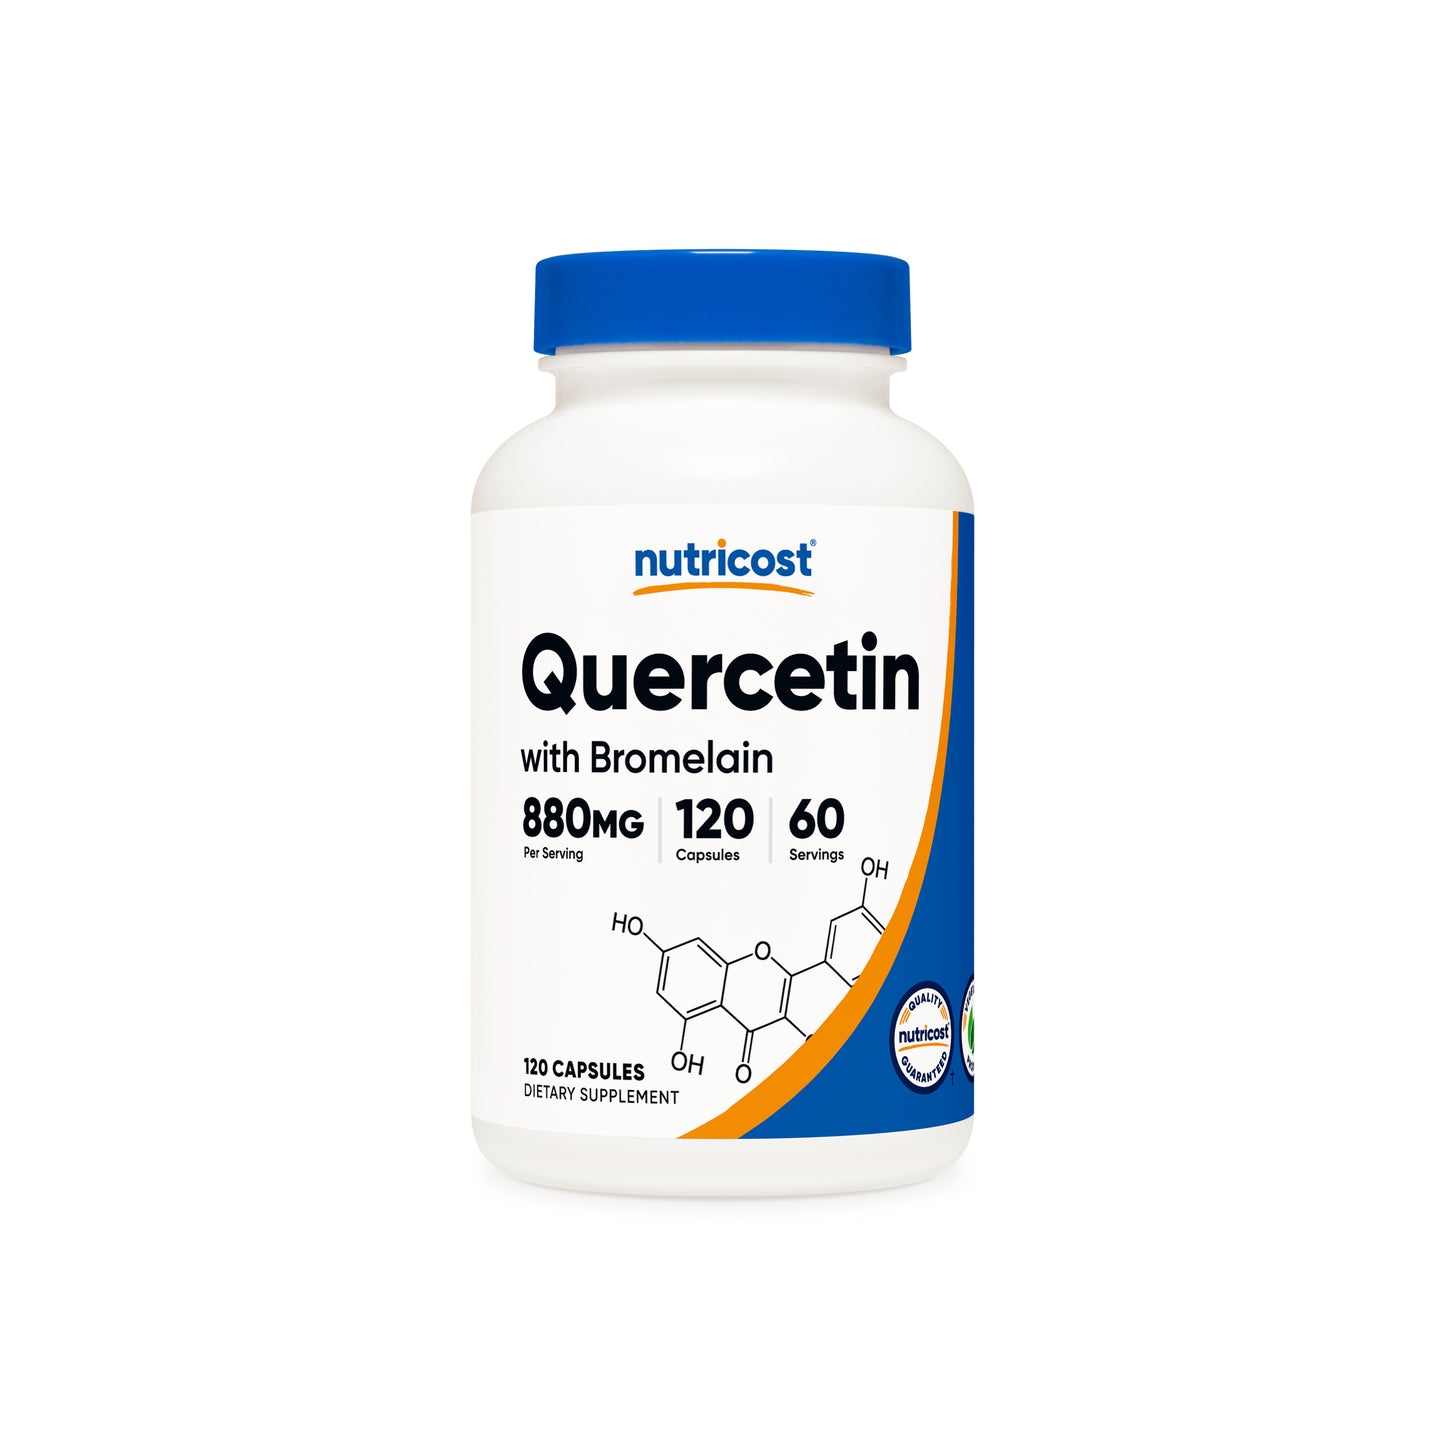 Nutricost Quercetin (With Bromelain) Capsules